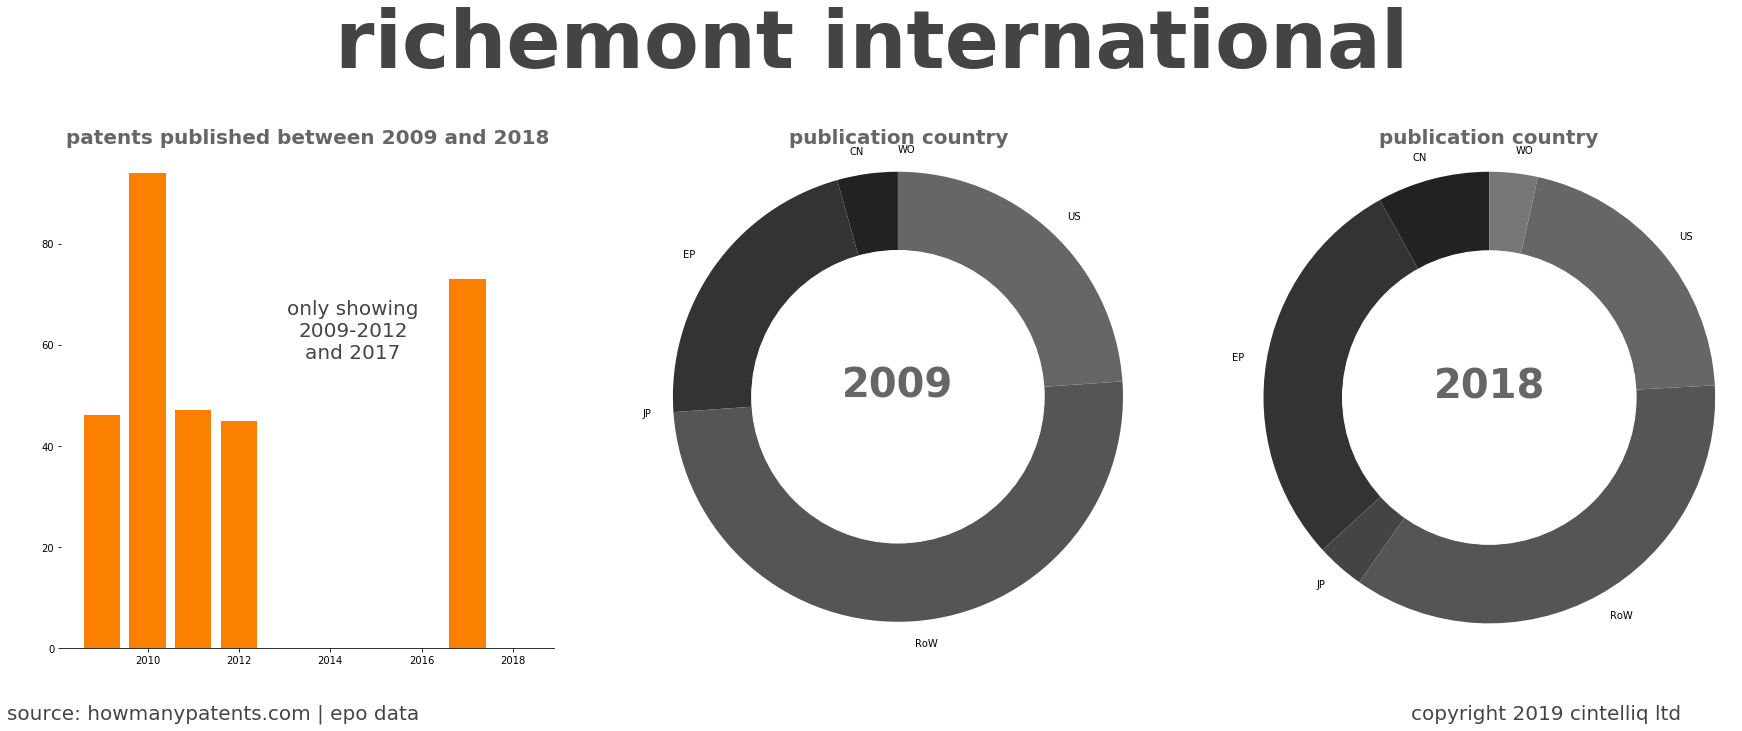 summary of patents for Richemont International